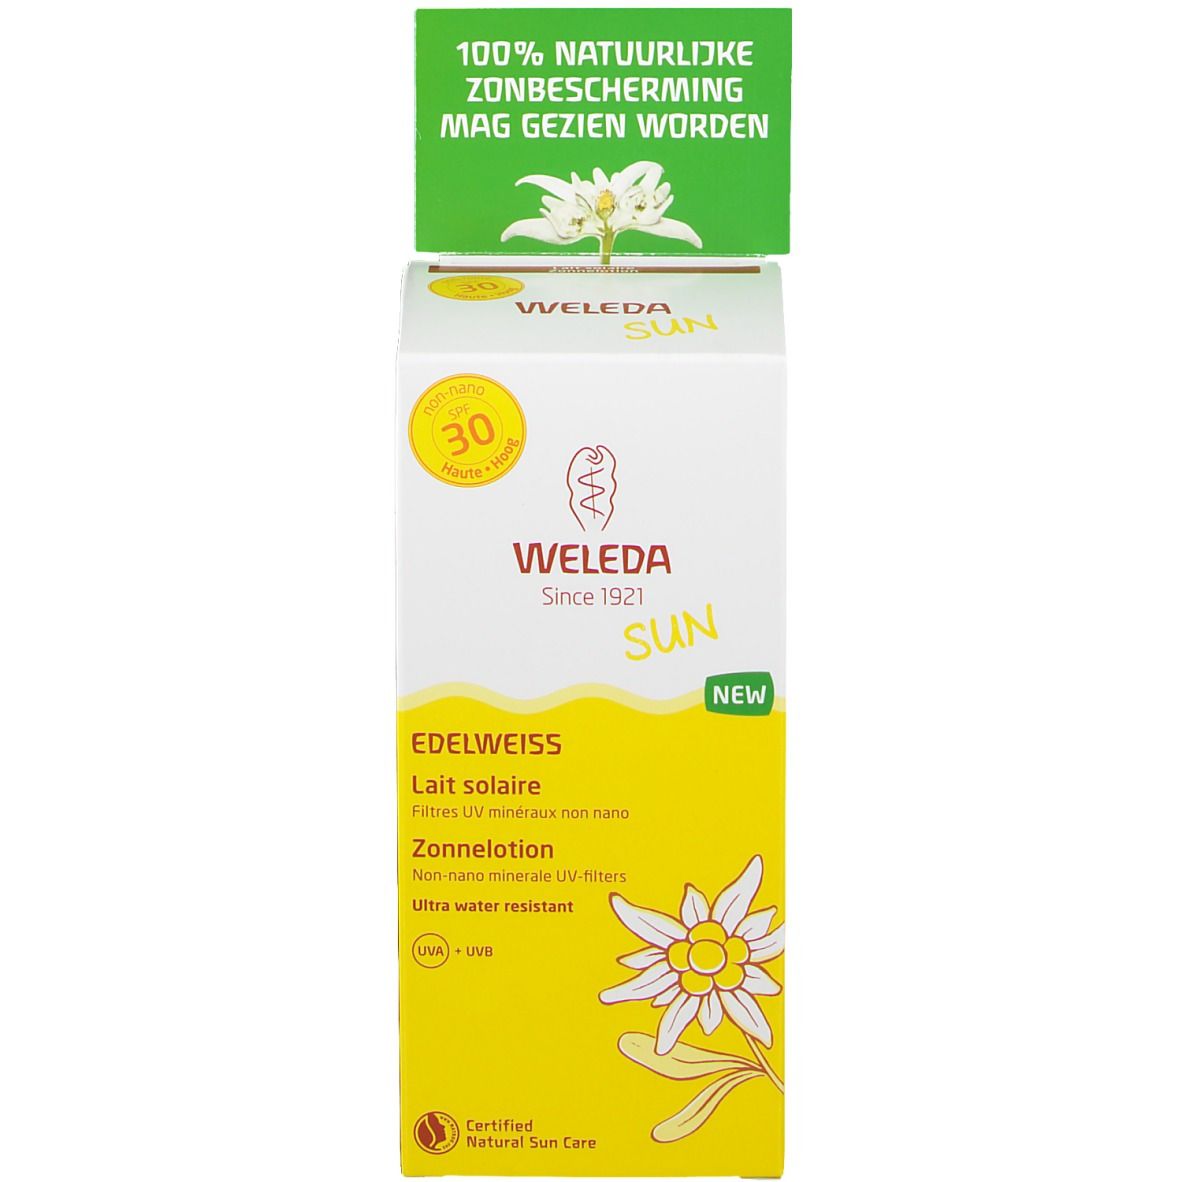 Weleda Sun Edelweiss Lait Solaire SPF30